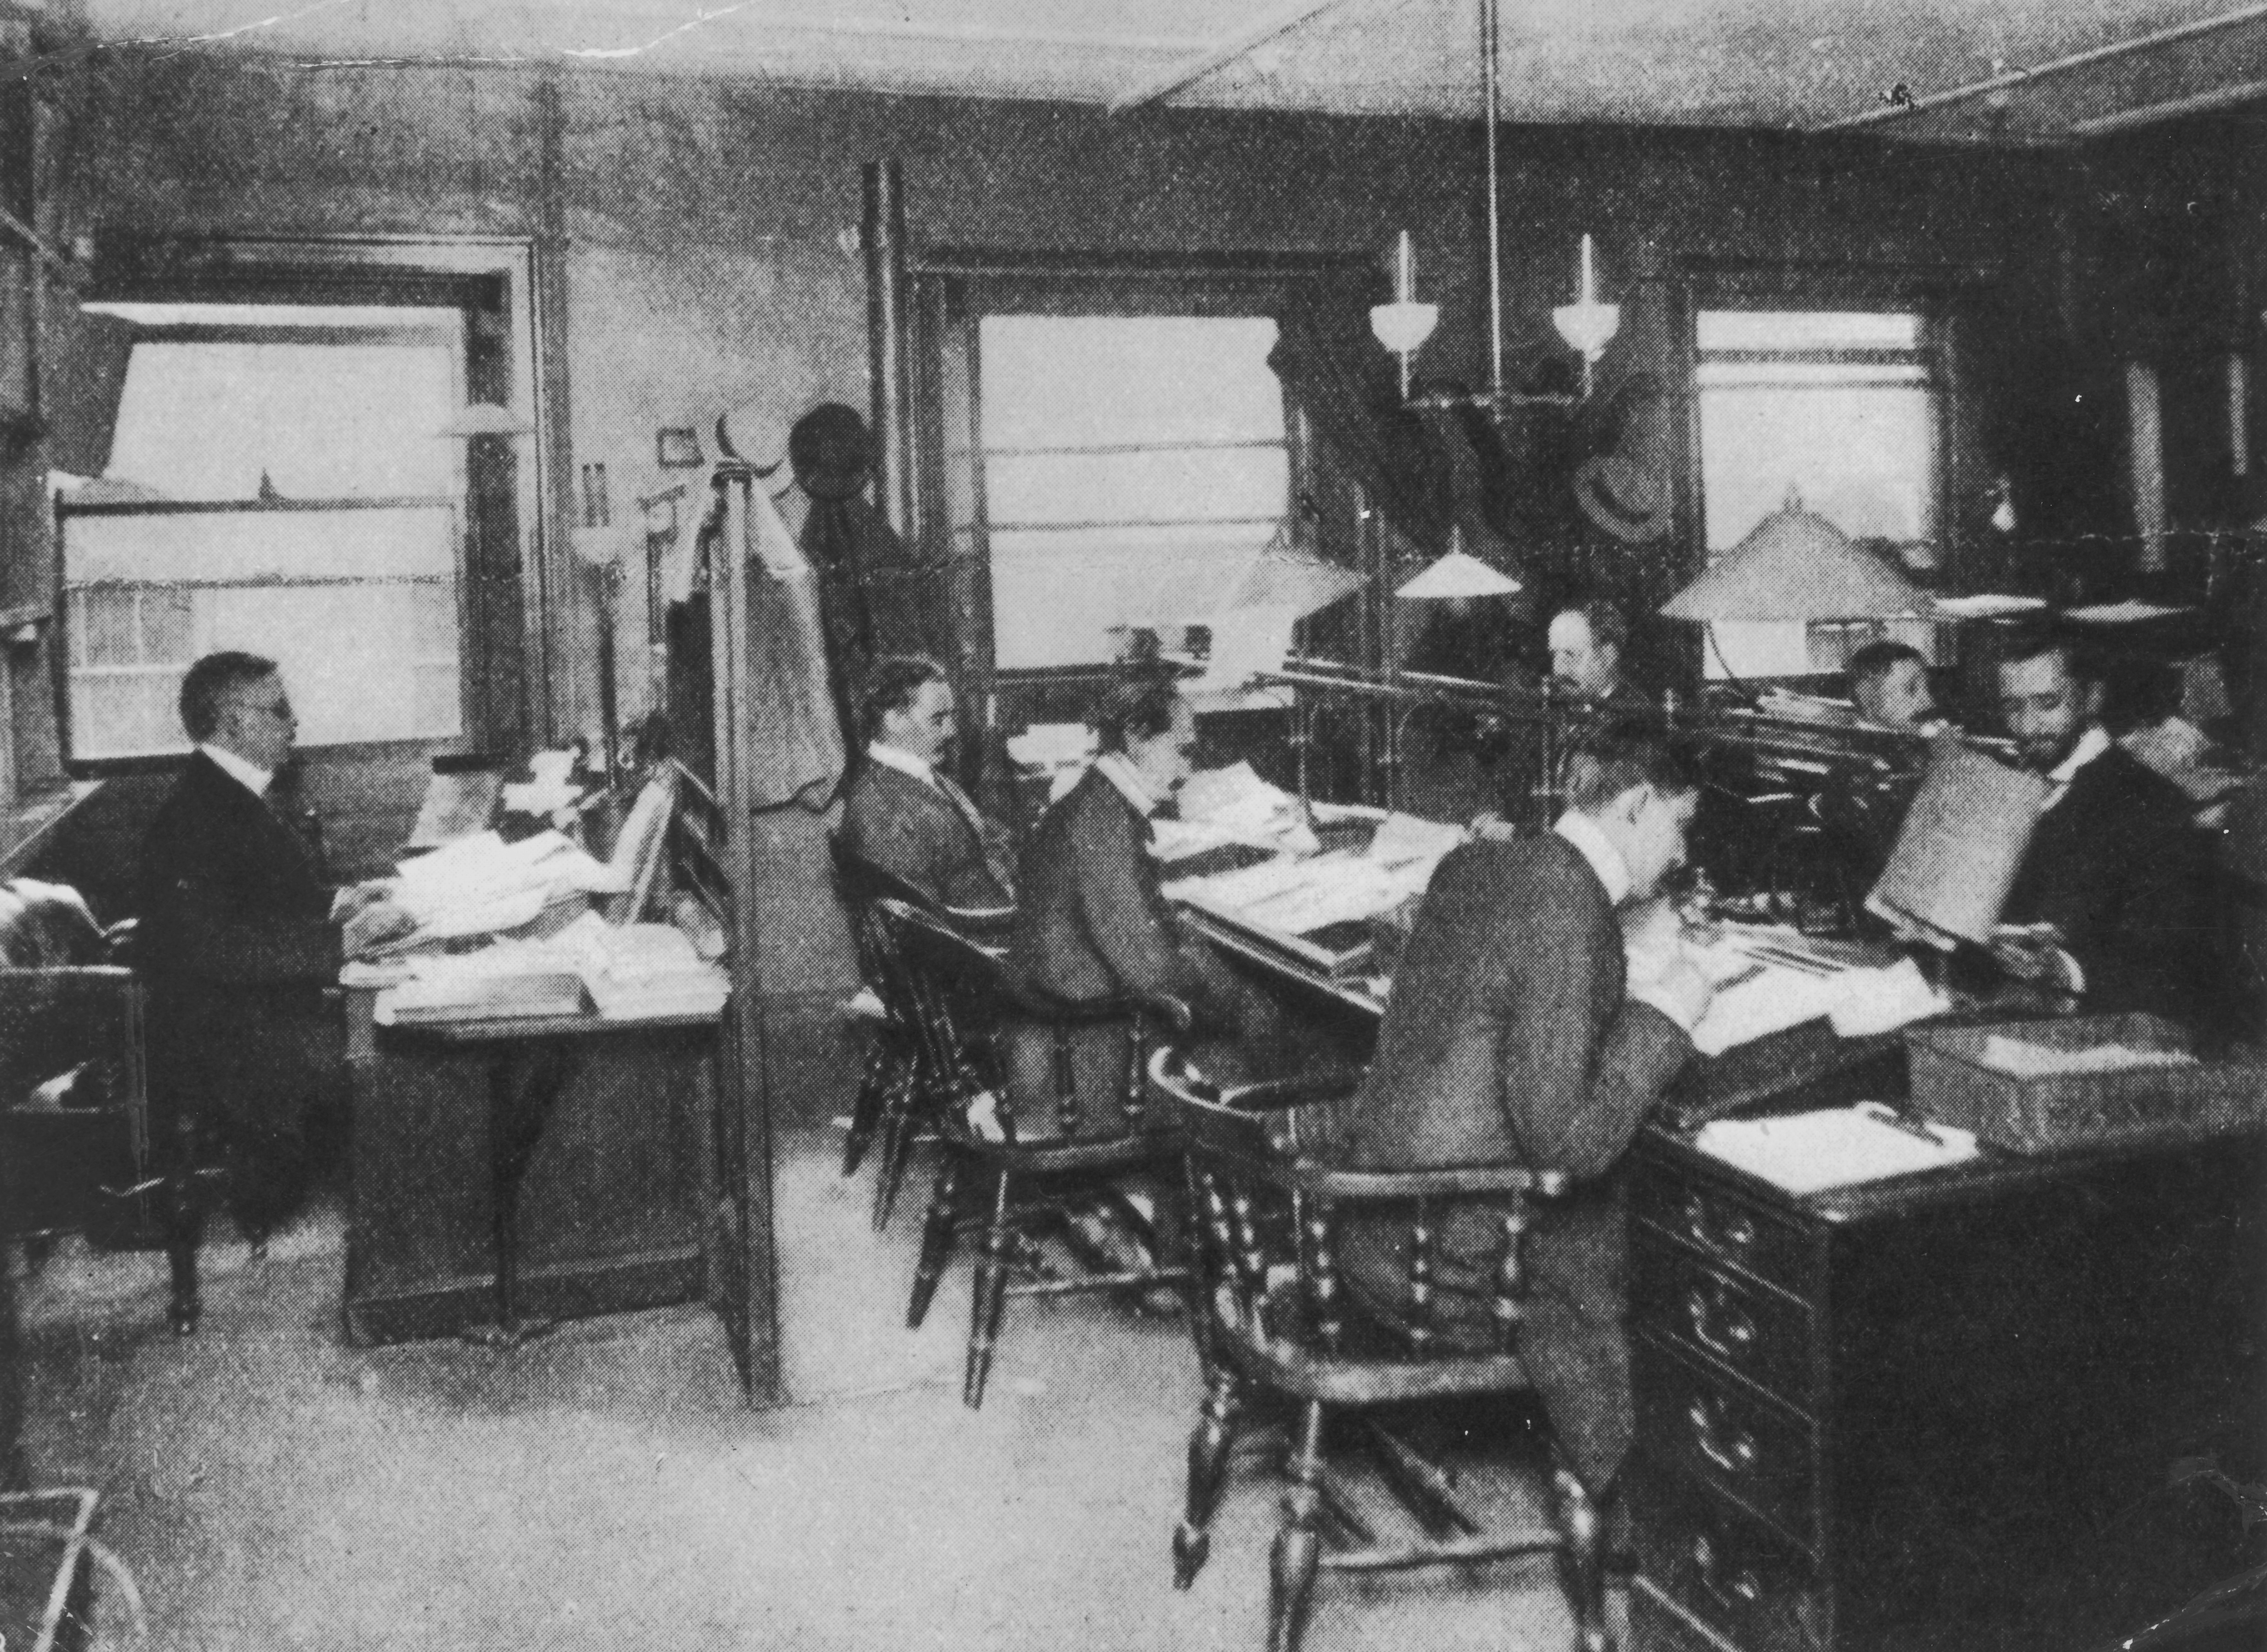 The editorial staff at Reuters Press Agency, circa 1900.